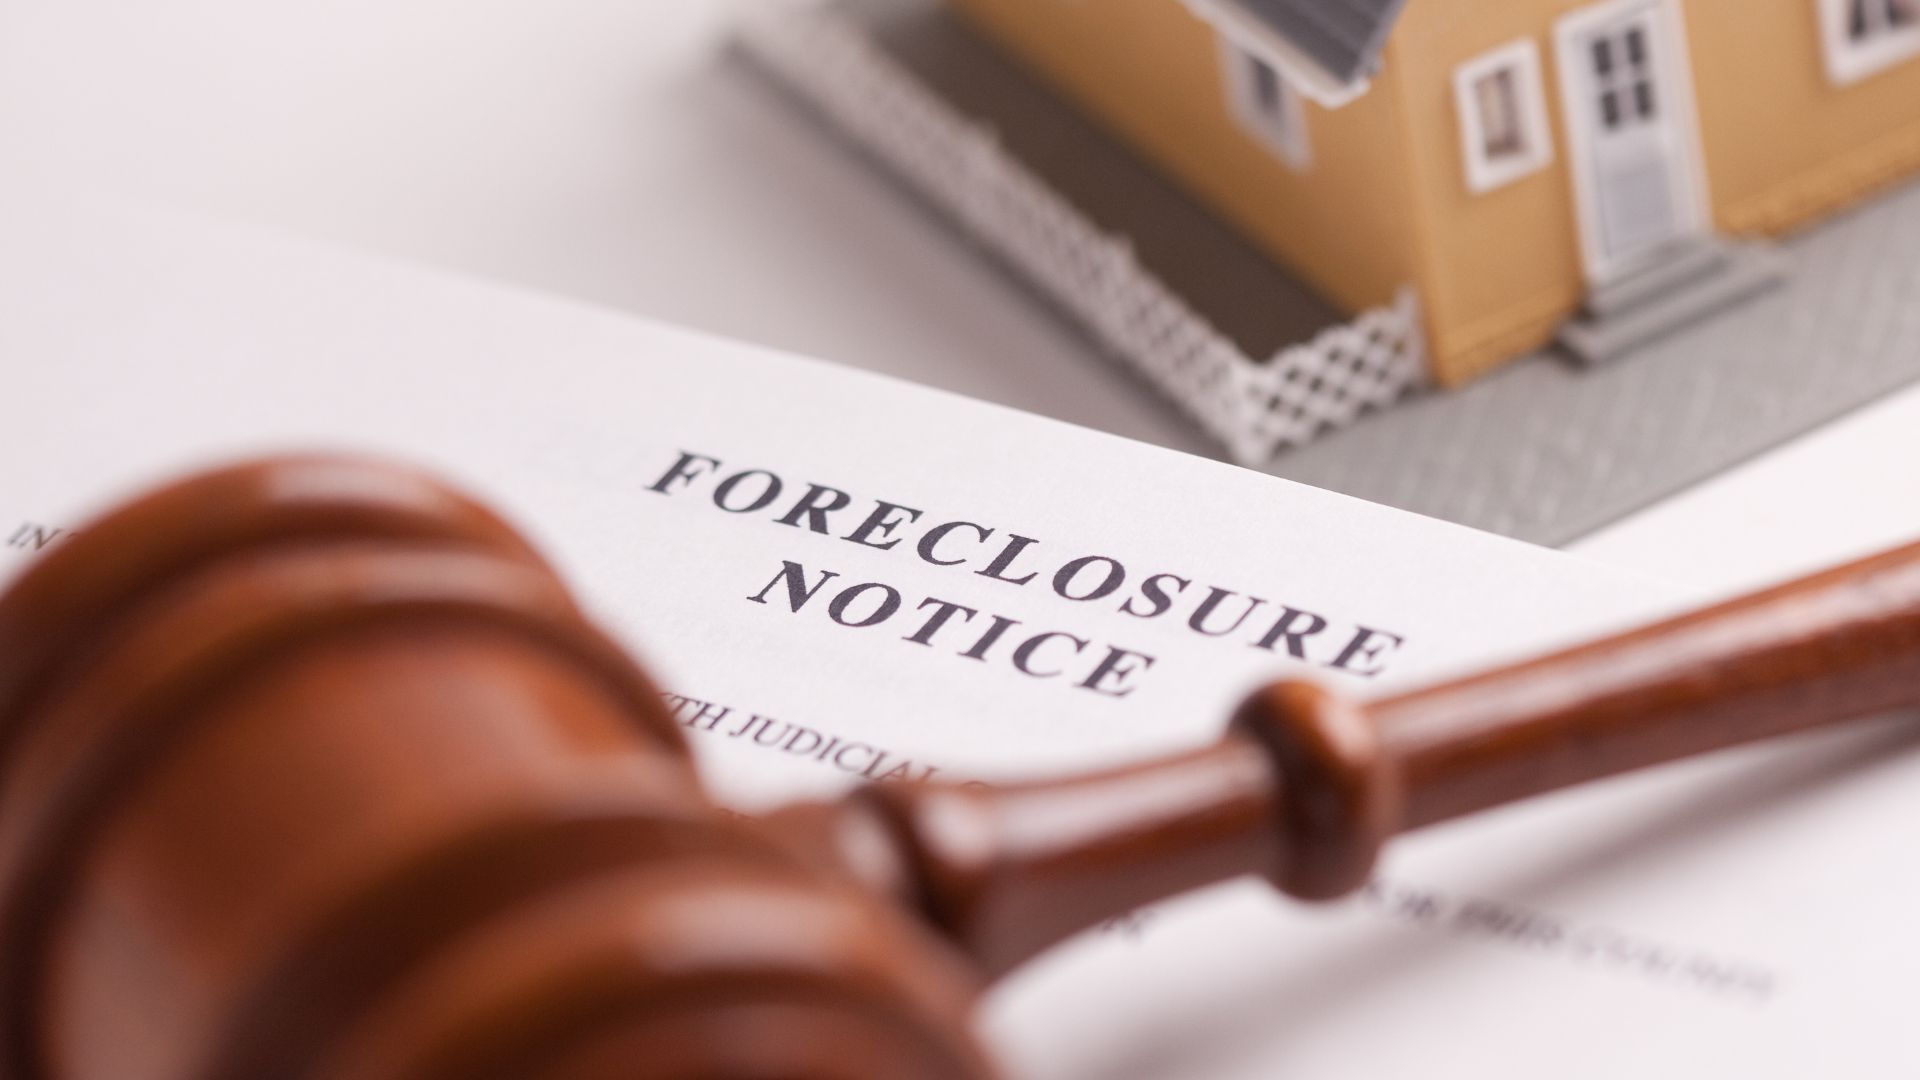 The Voluntary Payment Doctrine Protects Lenders' Rights to Legal Fees in Mortgage Foreclosures, Per New York Case